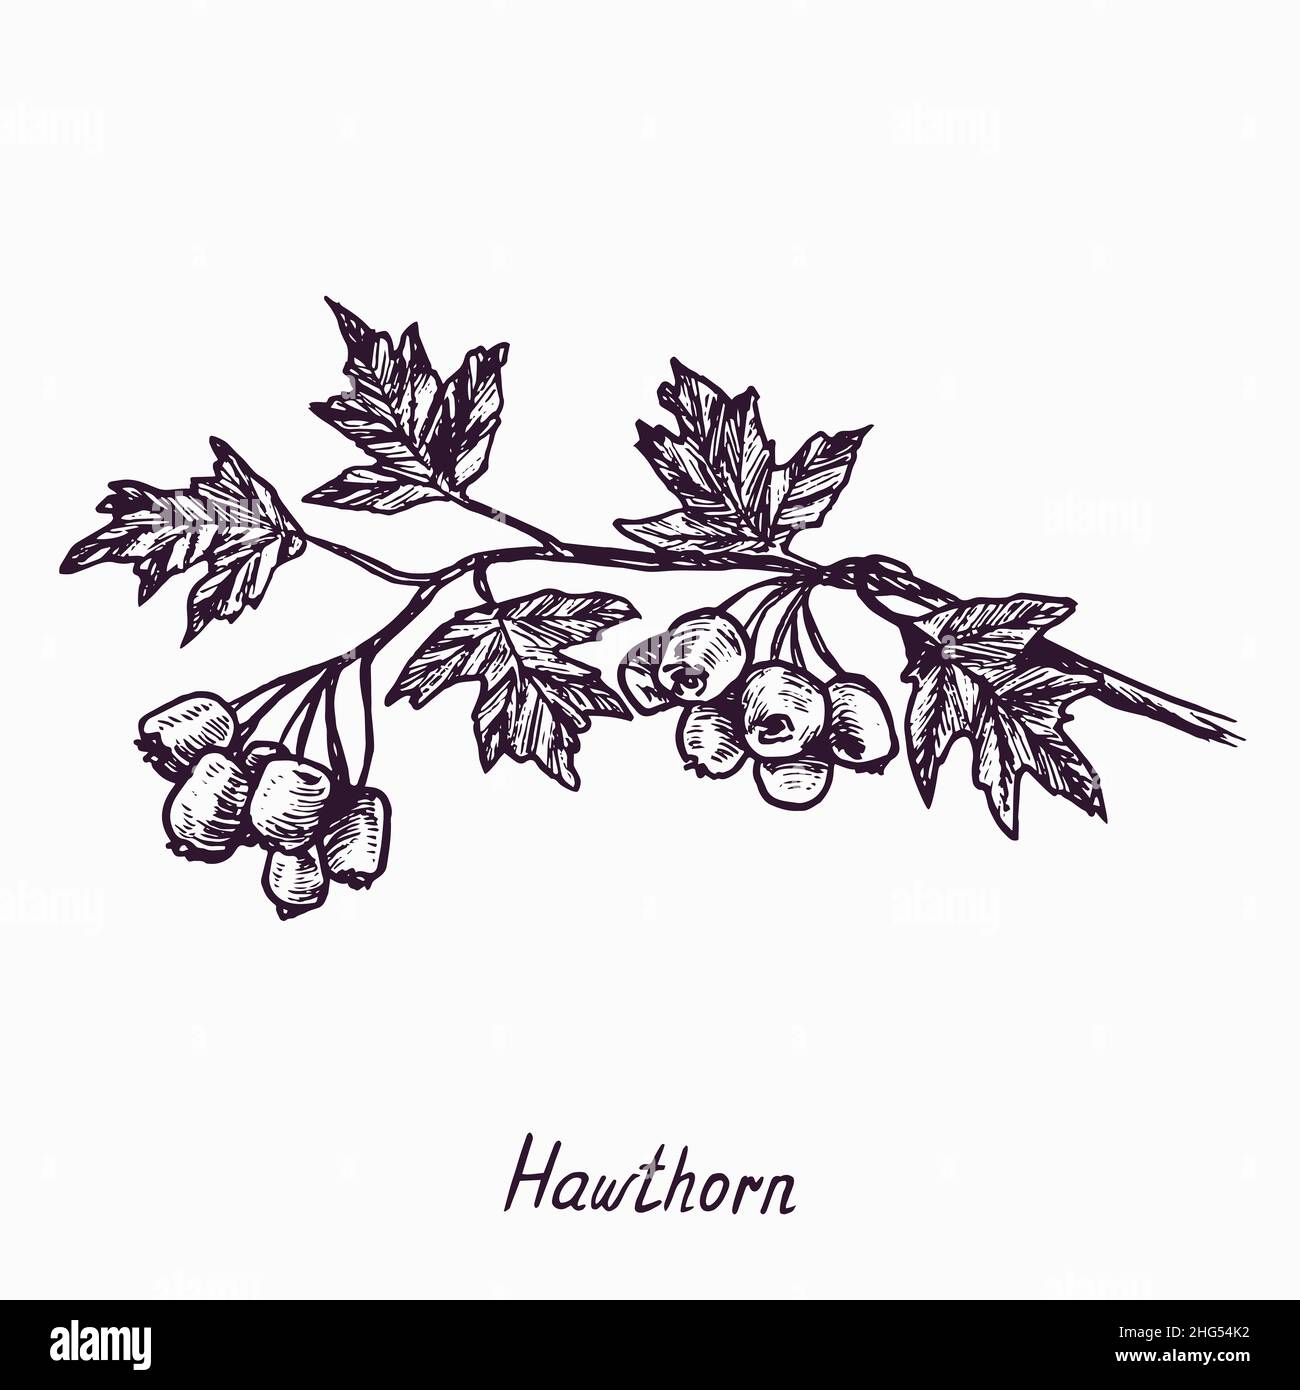 Hawthorn branch with berries and leaves, outline simple doodle drawing with inscription, gravure style Stock Photo